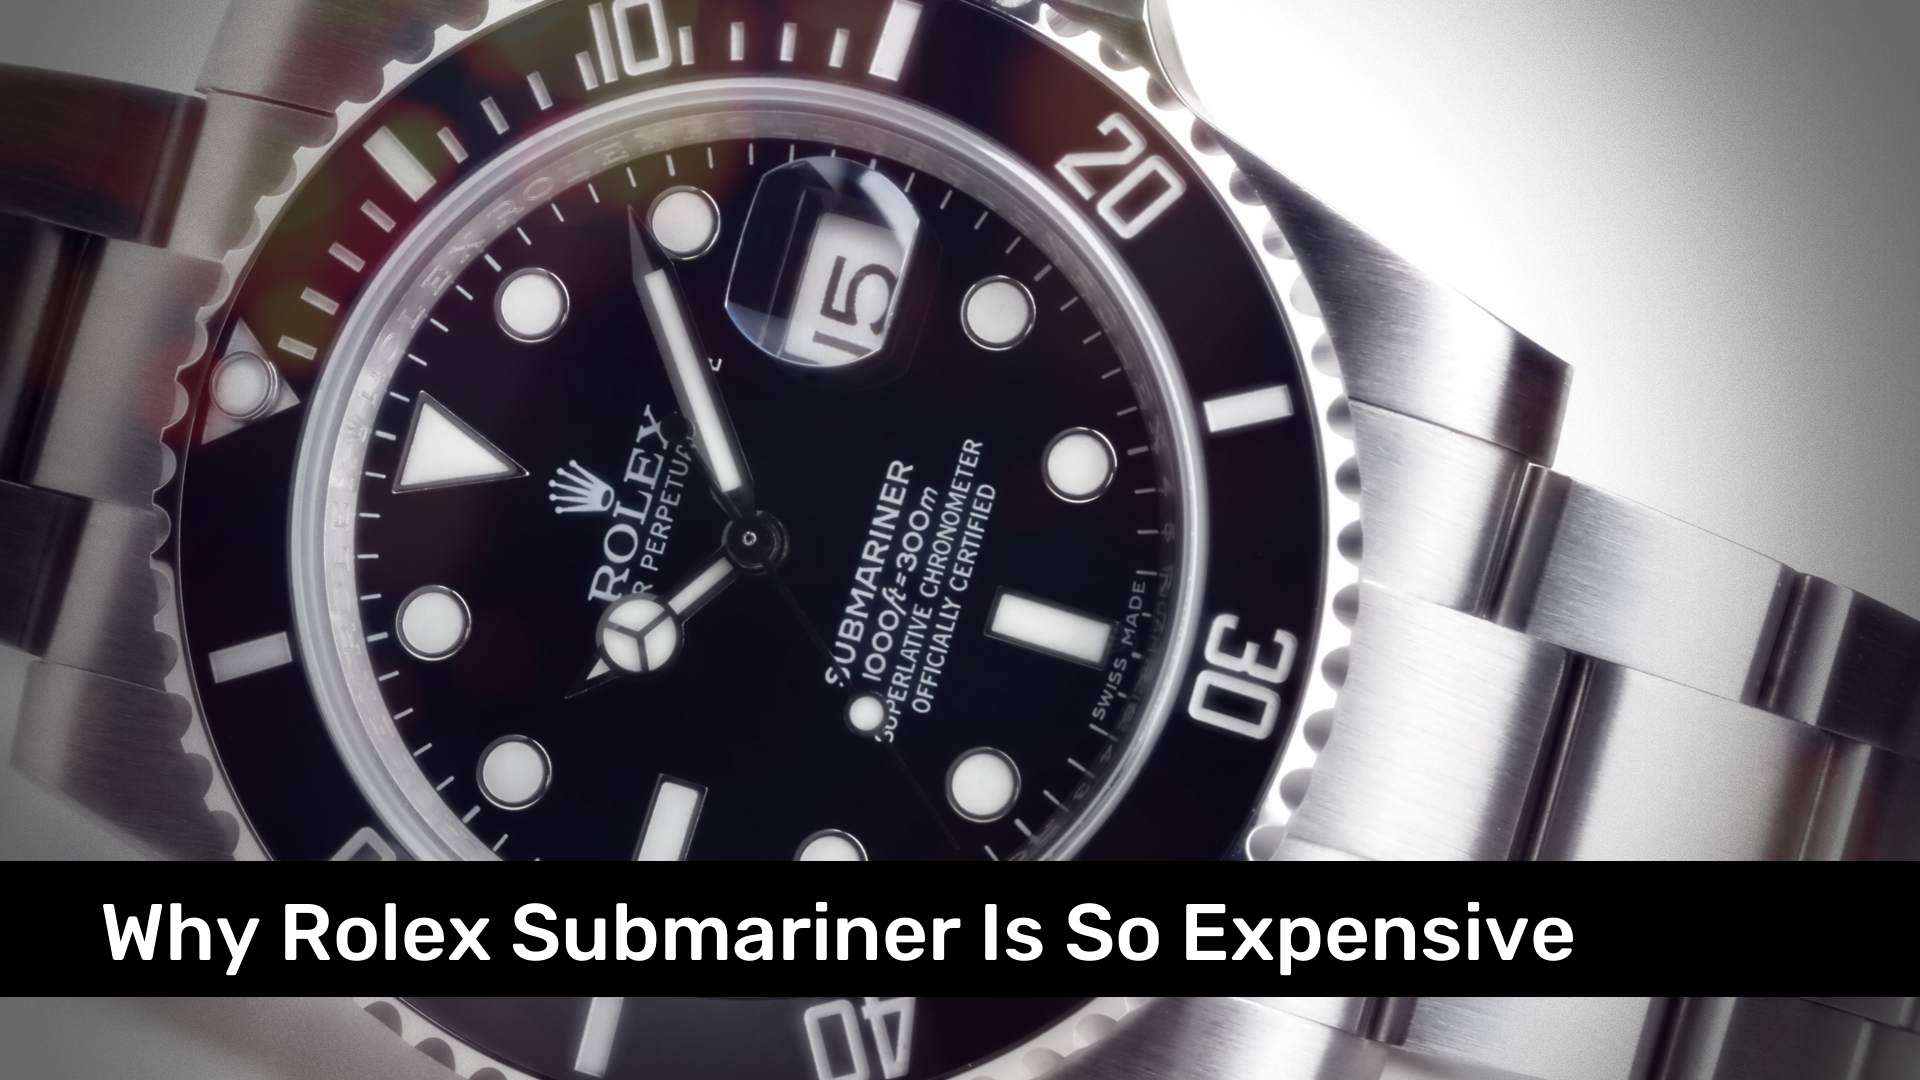 Why Rolex Submariner Is So Expensive